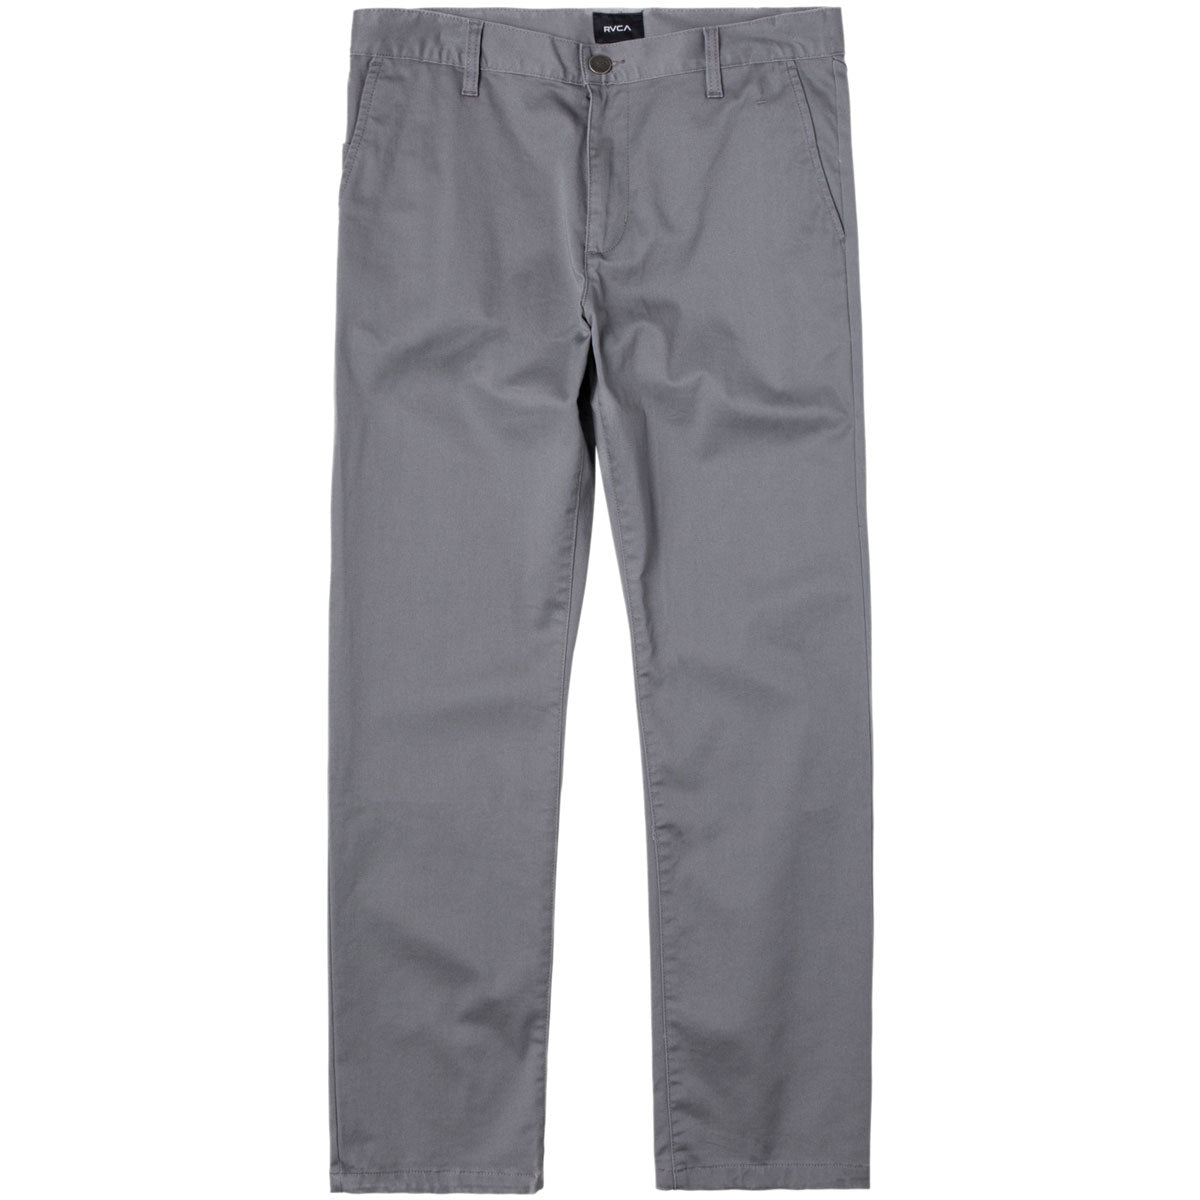 RVCA Weekend Stretch Pants - Smoked image 4